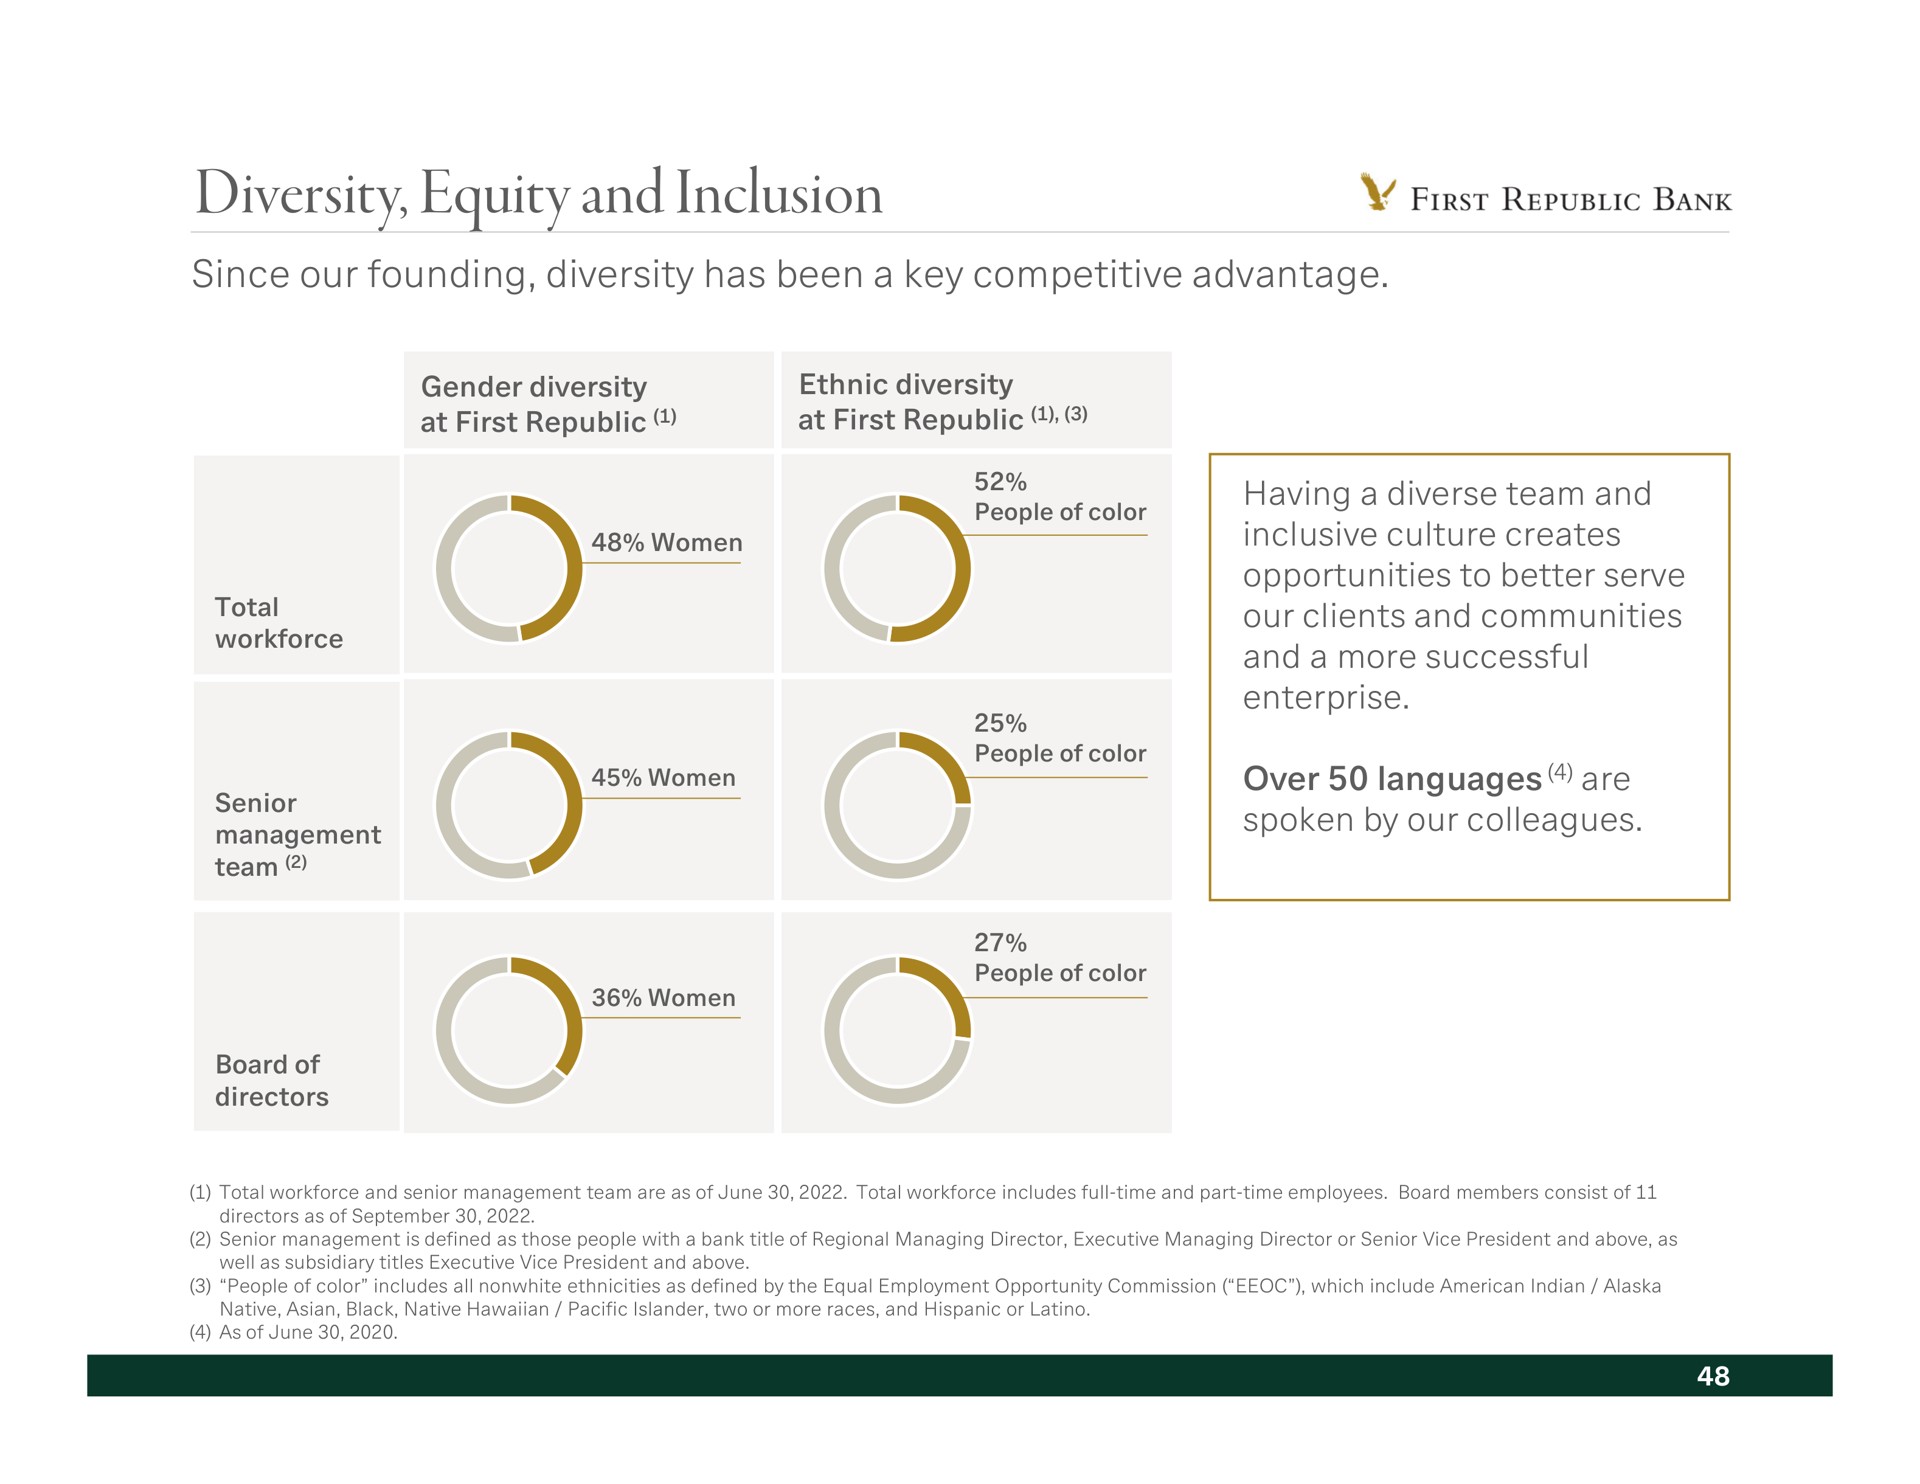 diversity equity and inclusion since our founding has been a key competitive advantage women total management having a diverse team our clients communities over languages are spoken by our colleagues | First Republic Bank